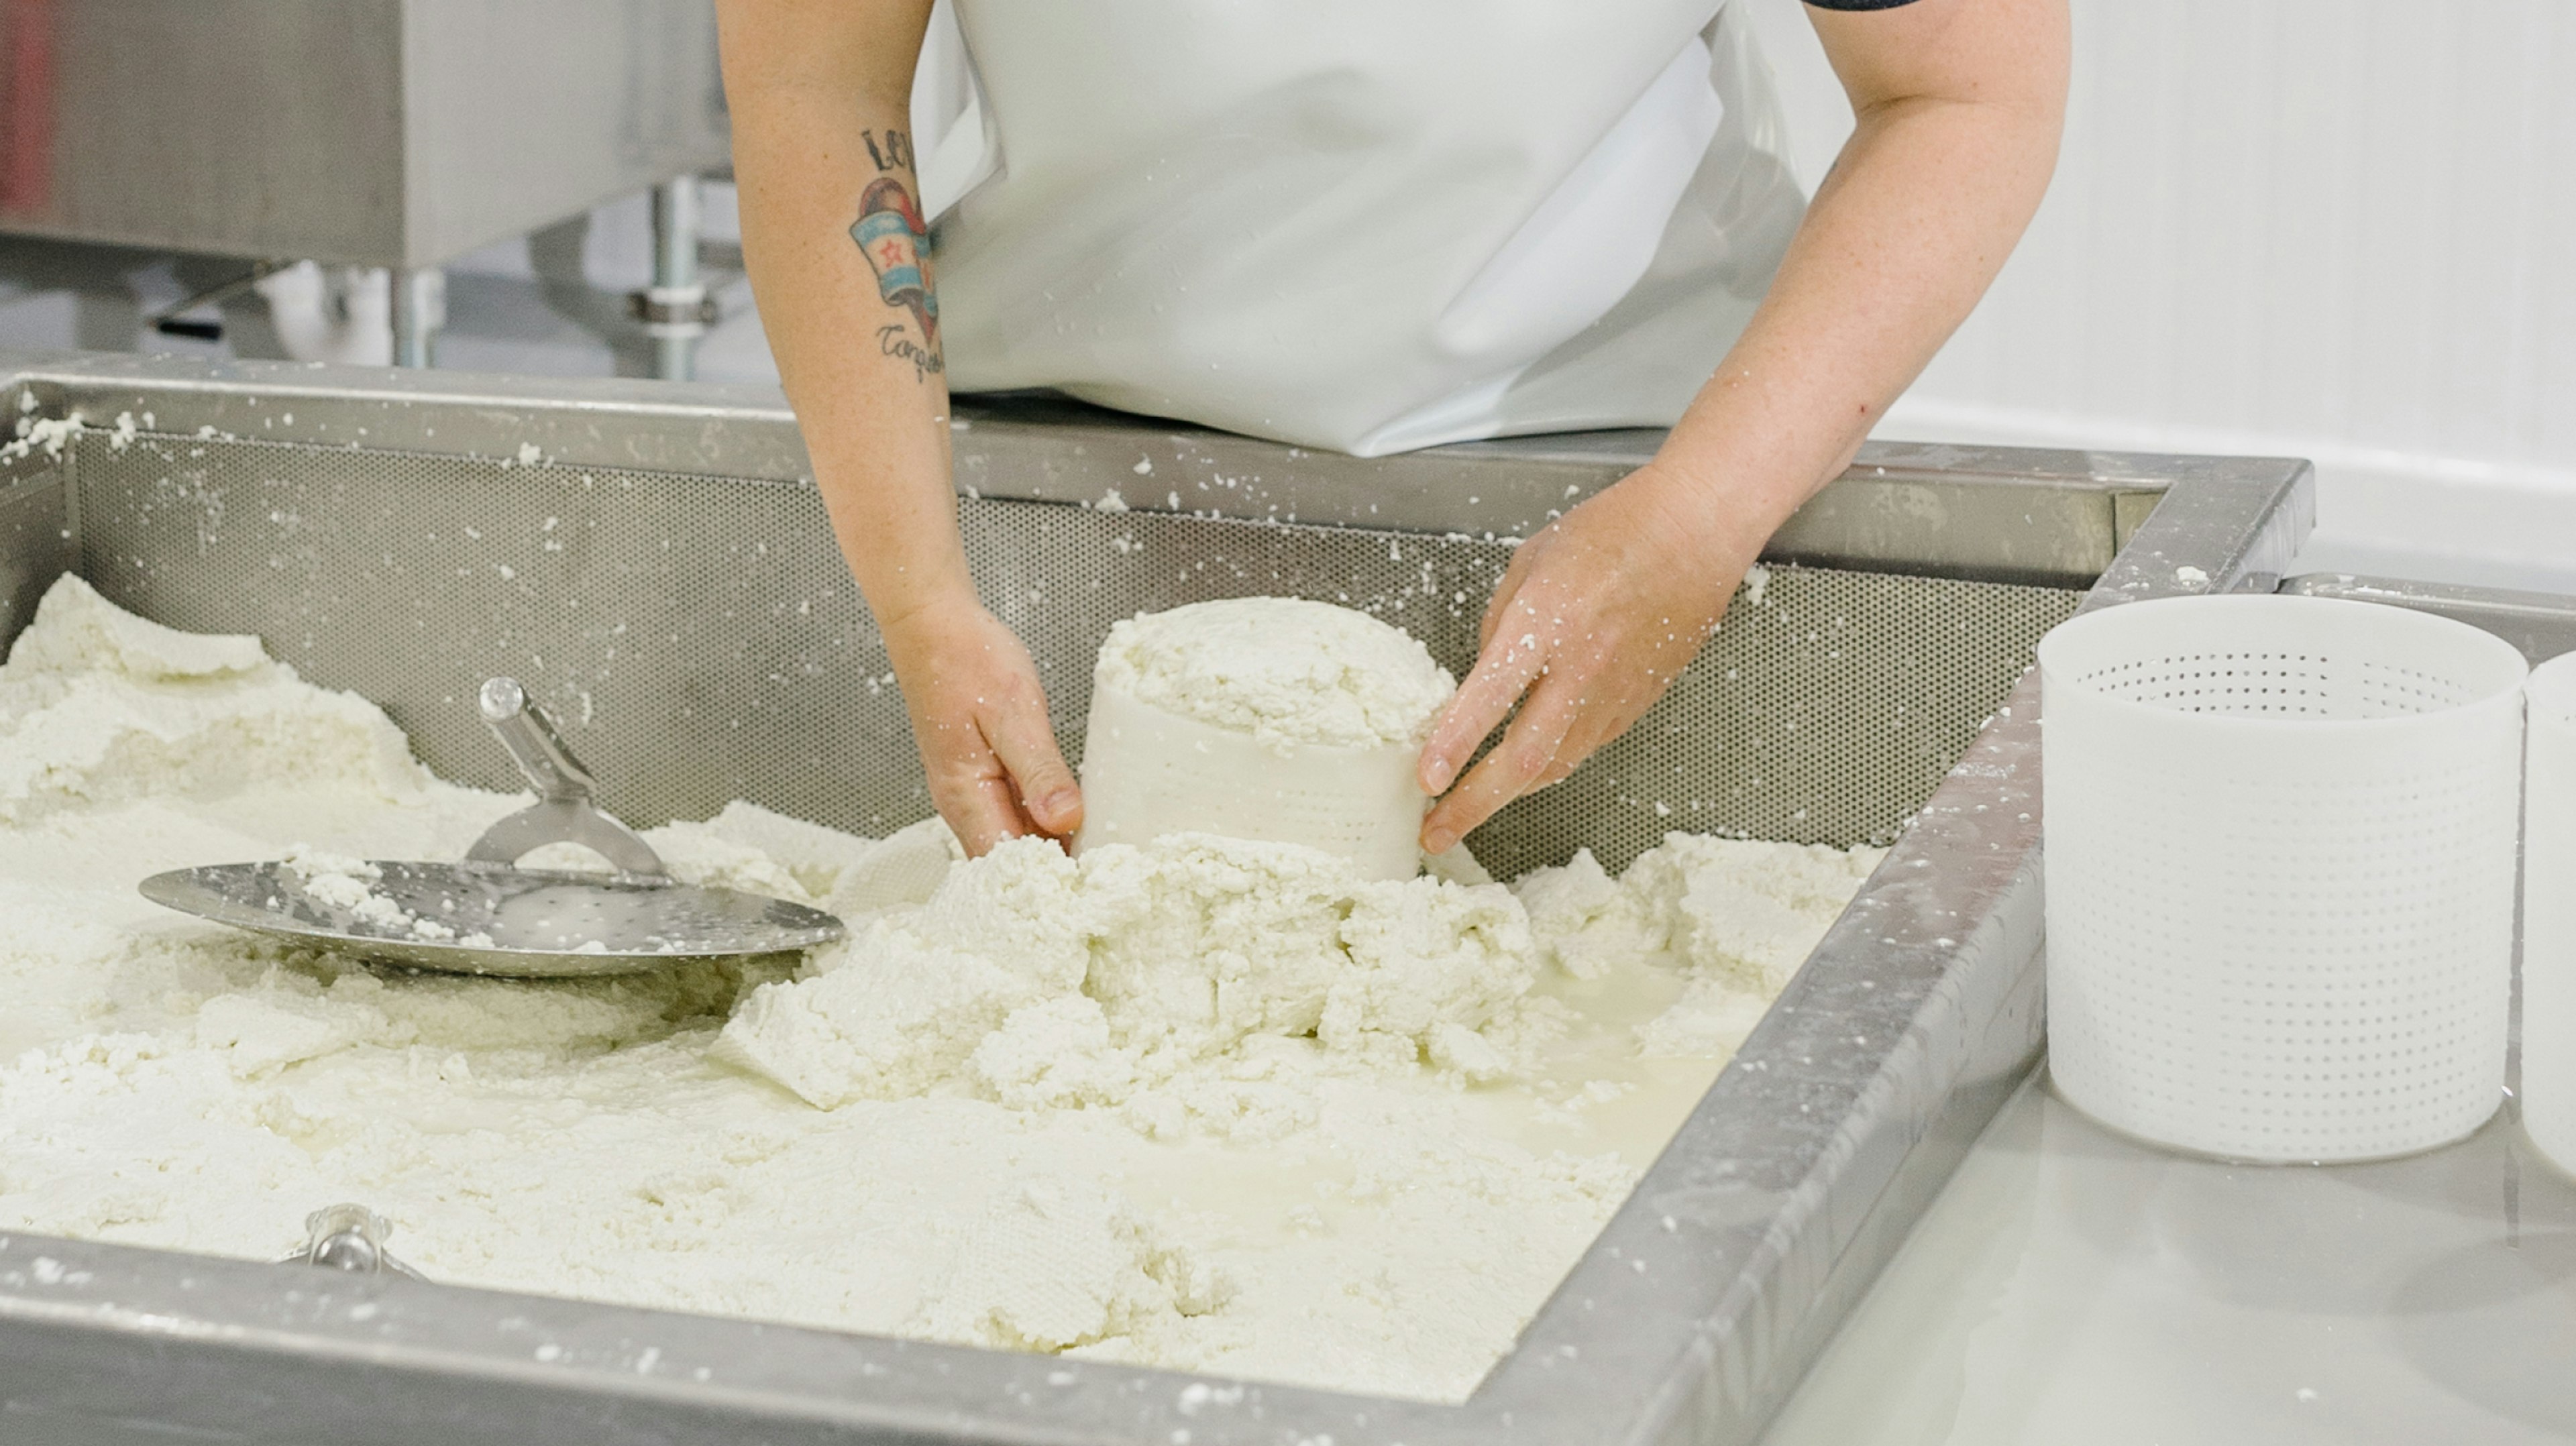 The Romance & Realities of Small-Scale Artisan Cheesemaking in the U.S. 